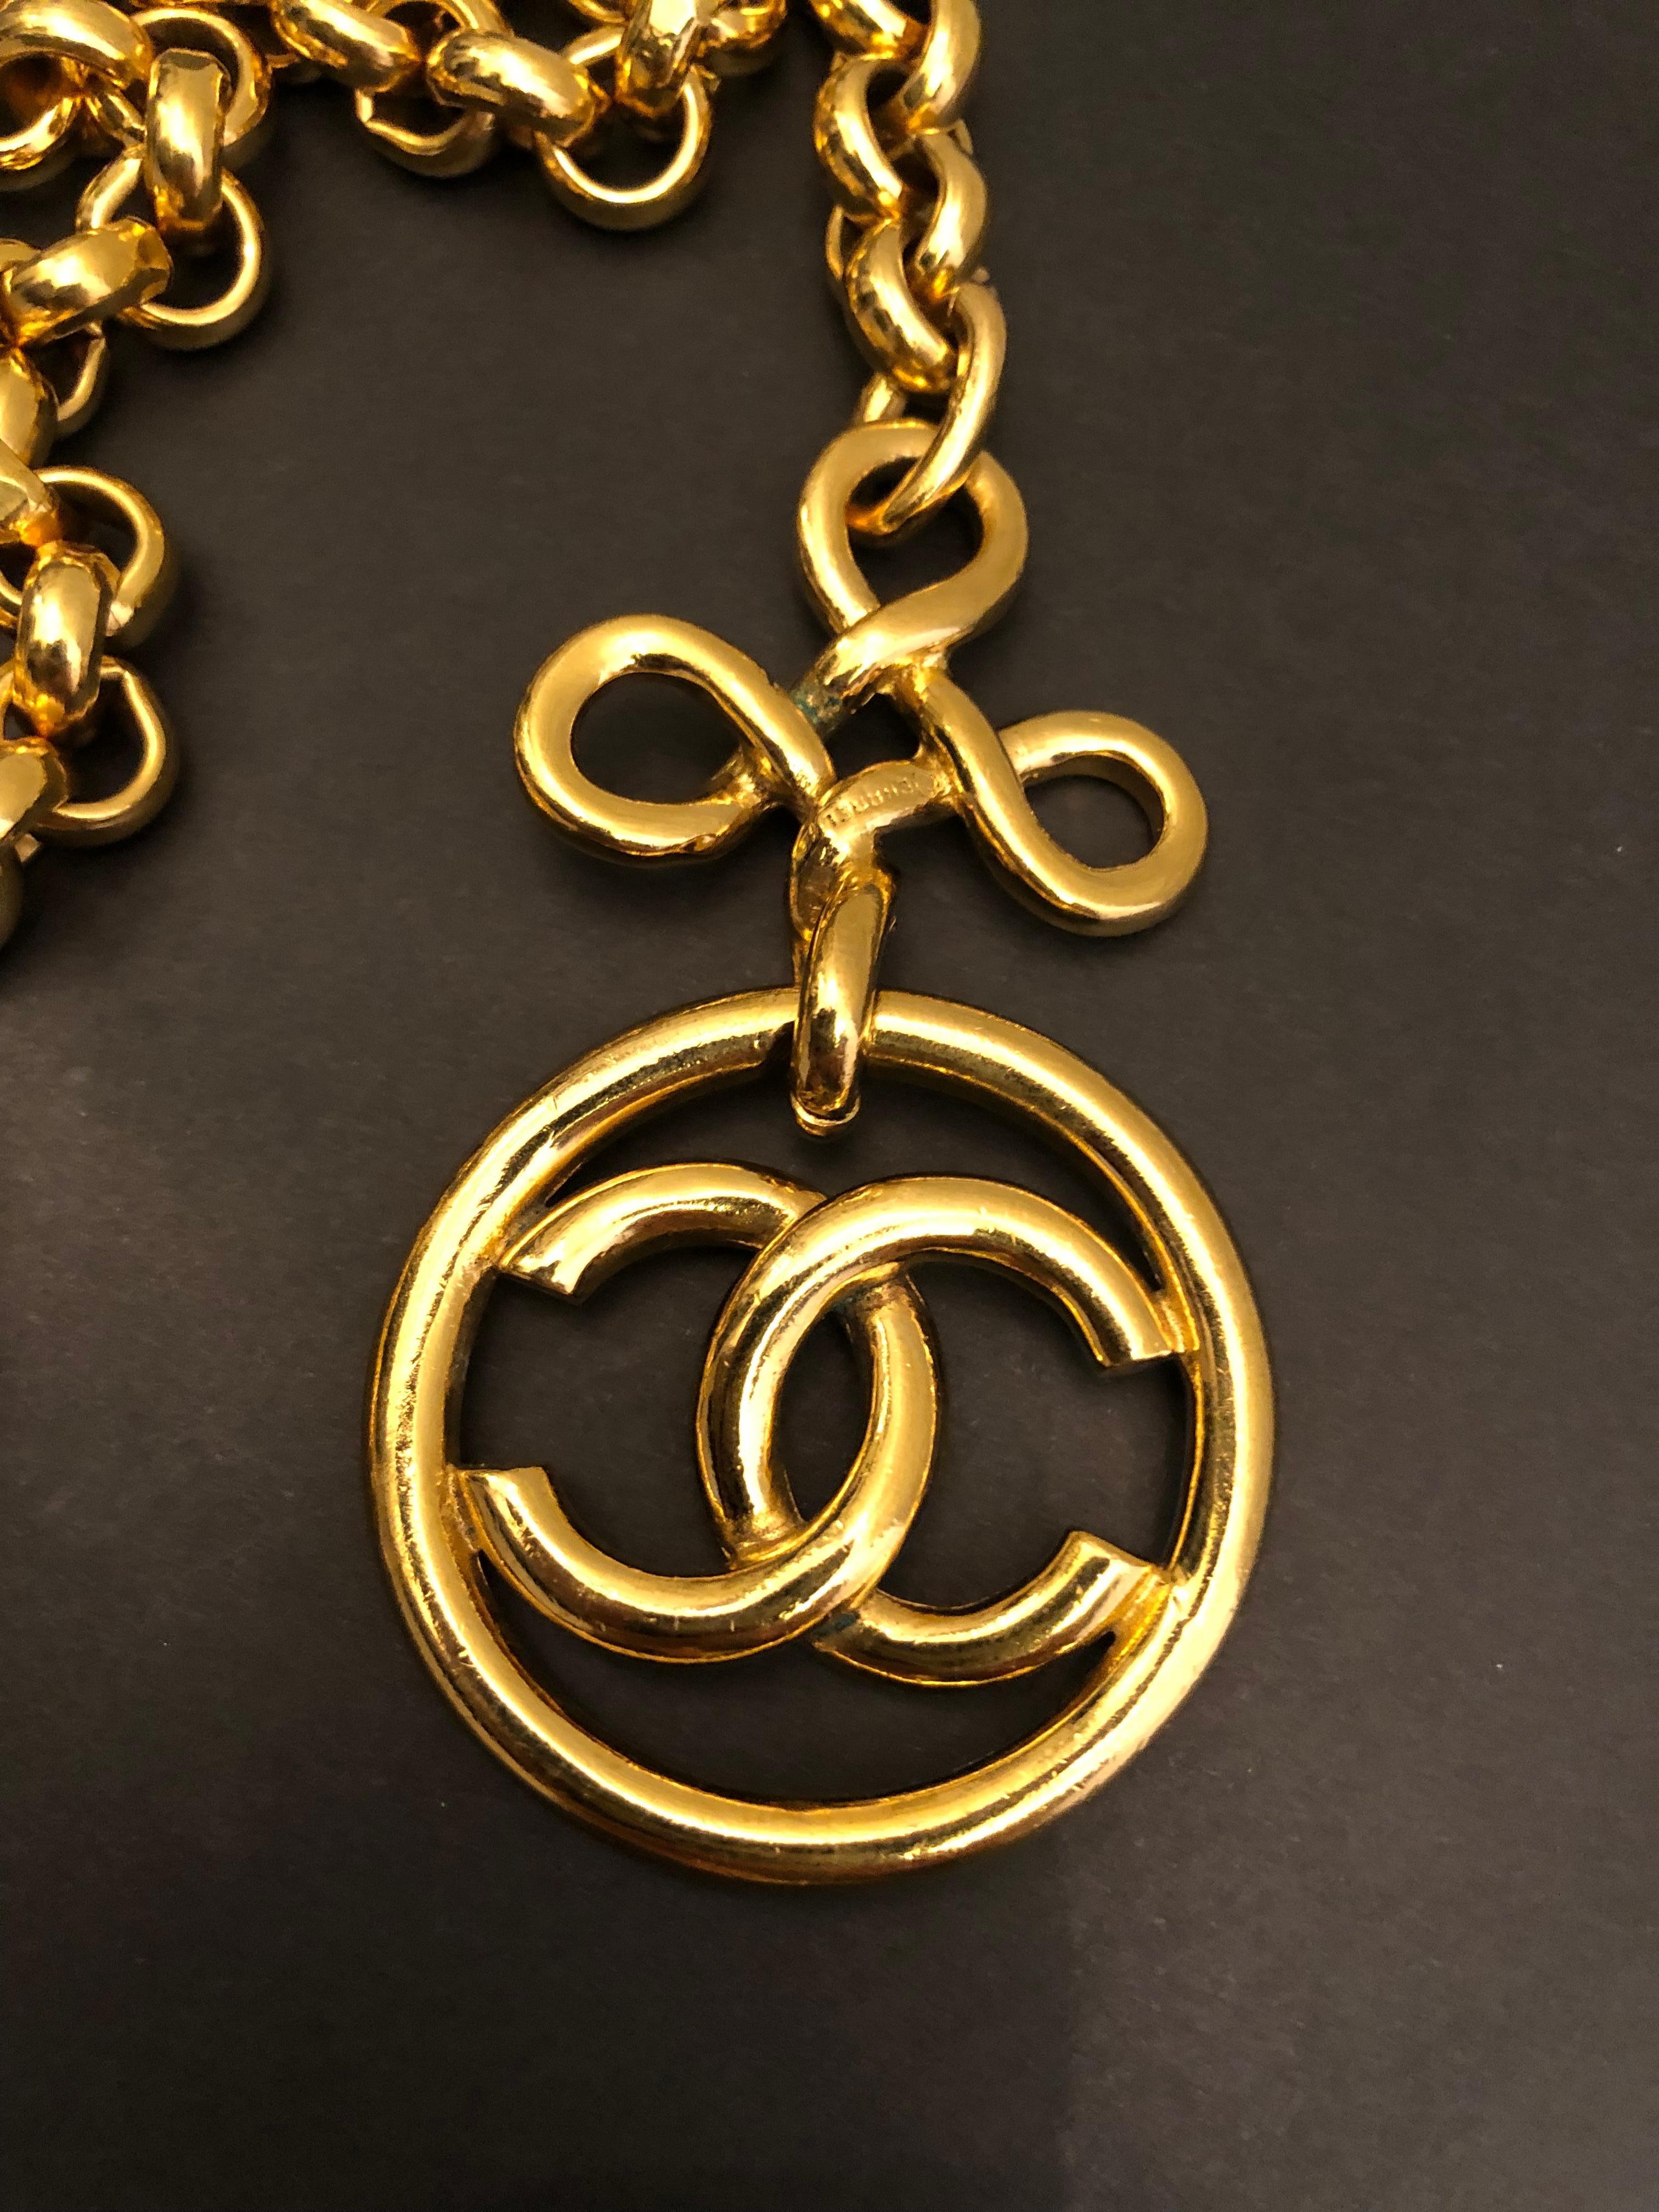 1993 Vintage CHANEL Gold Toned Clover CC Chain Belt 42 Inches Long For Sale 4